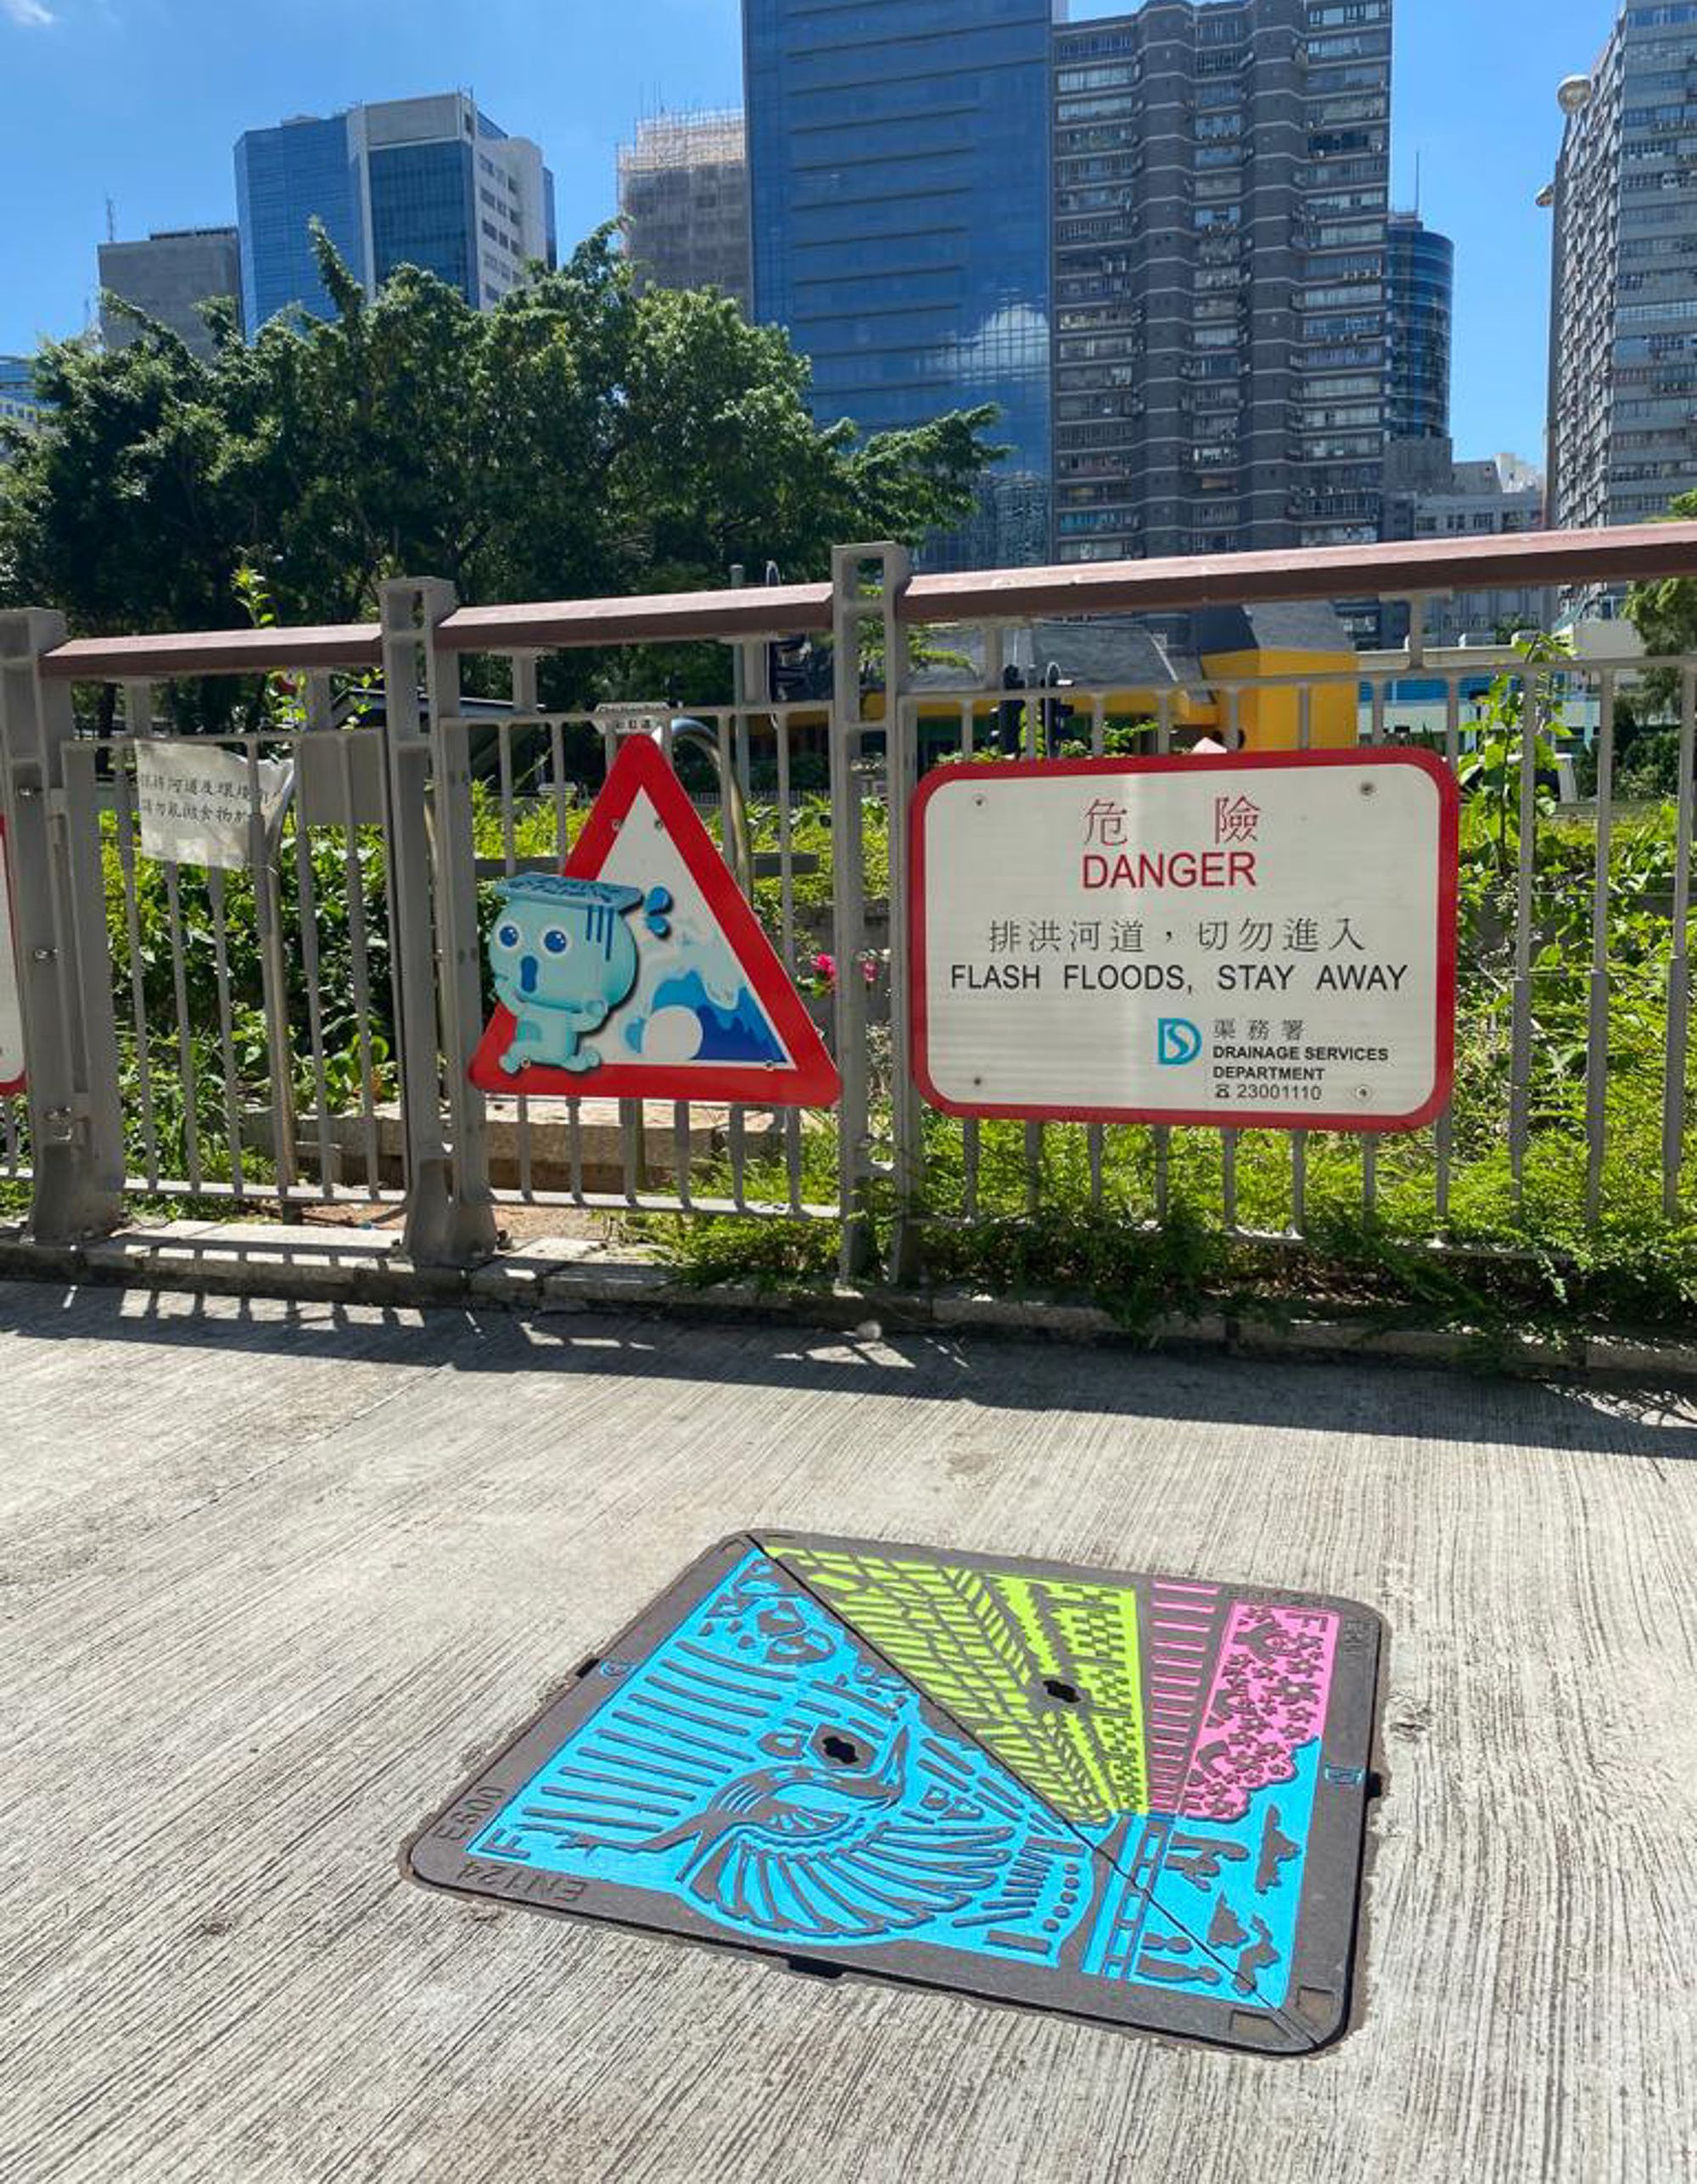 Thematic manhole cover located at Kai Tak River.